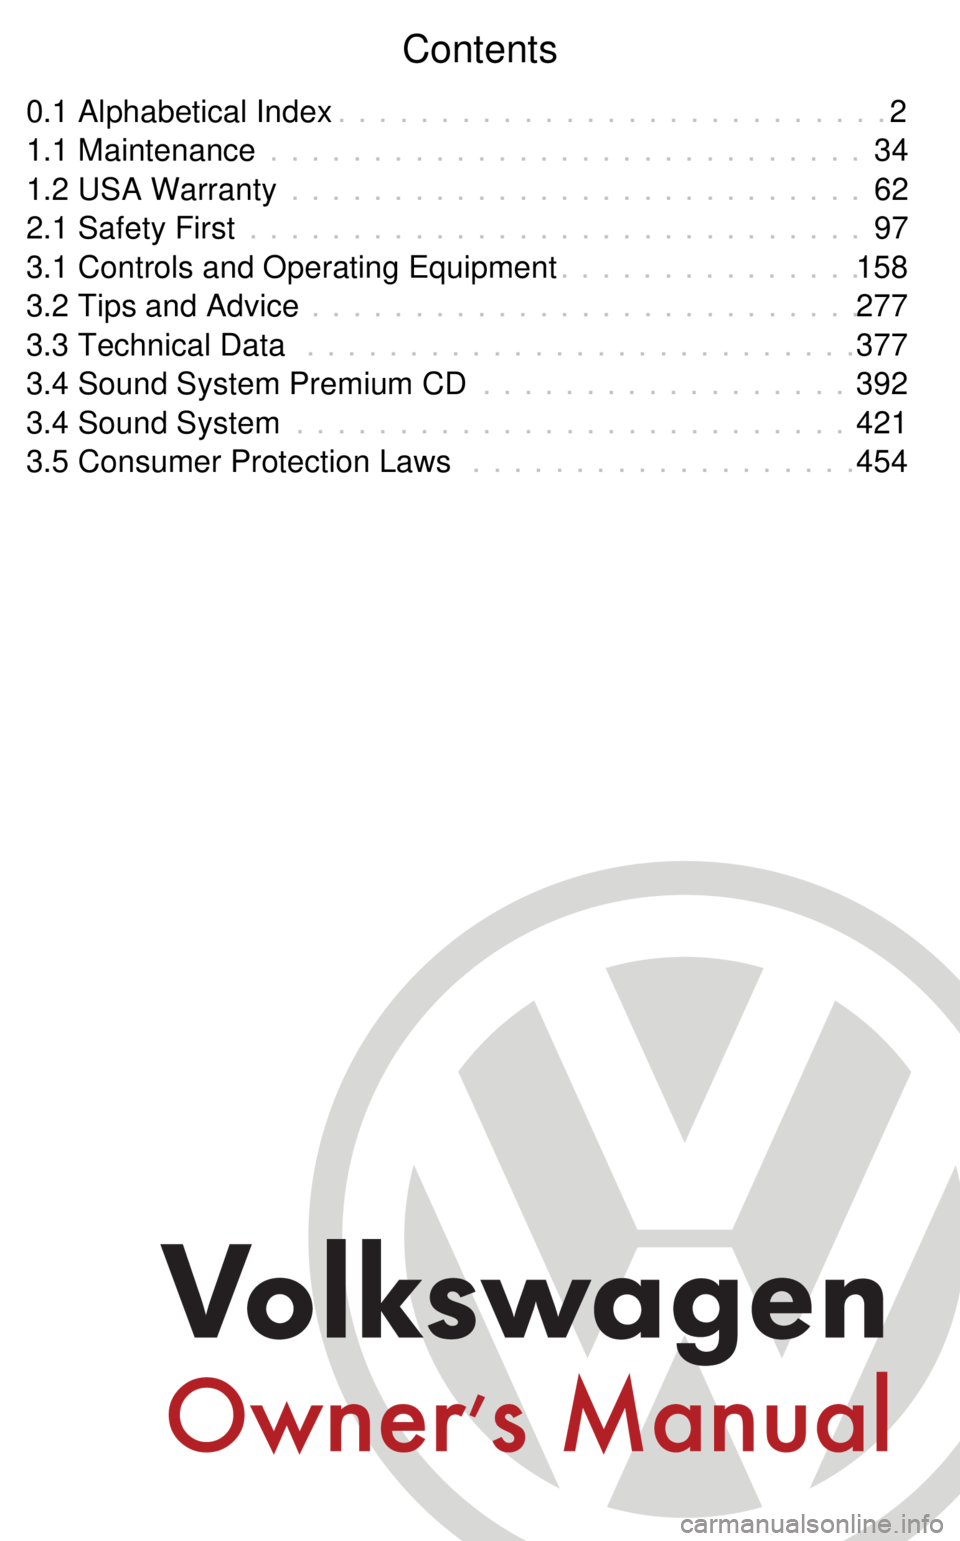 VOLKSWAGEN GOLF 1999  Owners Manual Contents
0.1 Alphabetical Index 2
. . . . . . . . . . . . . . . . . . . . . . . . . . .
1.1 Maintenance 34
. . . . . . . . . . . . . . . . . . . . . . . . . . . . .
1.2 USA Warranty 62
. . . . . . . .